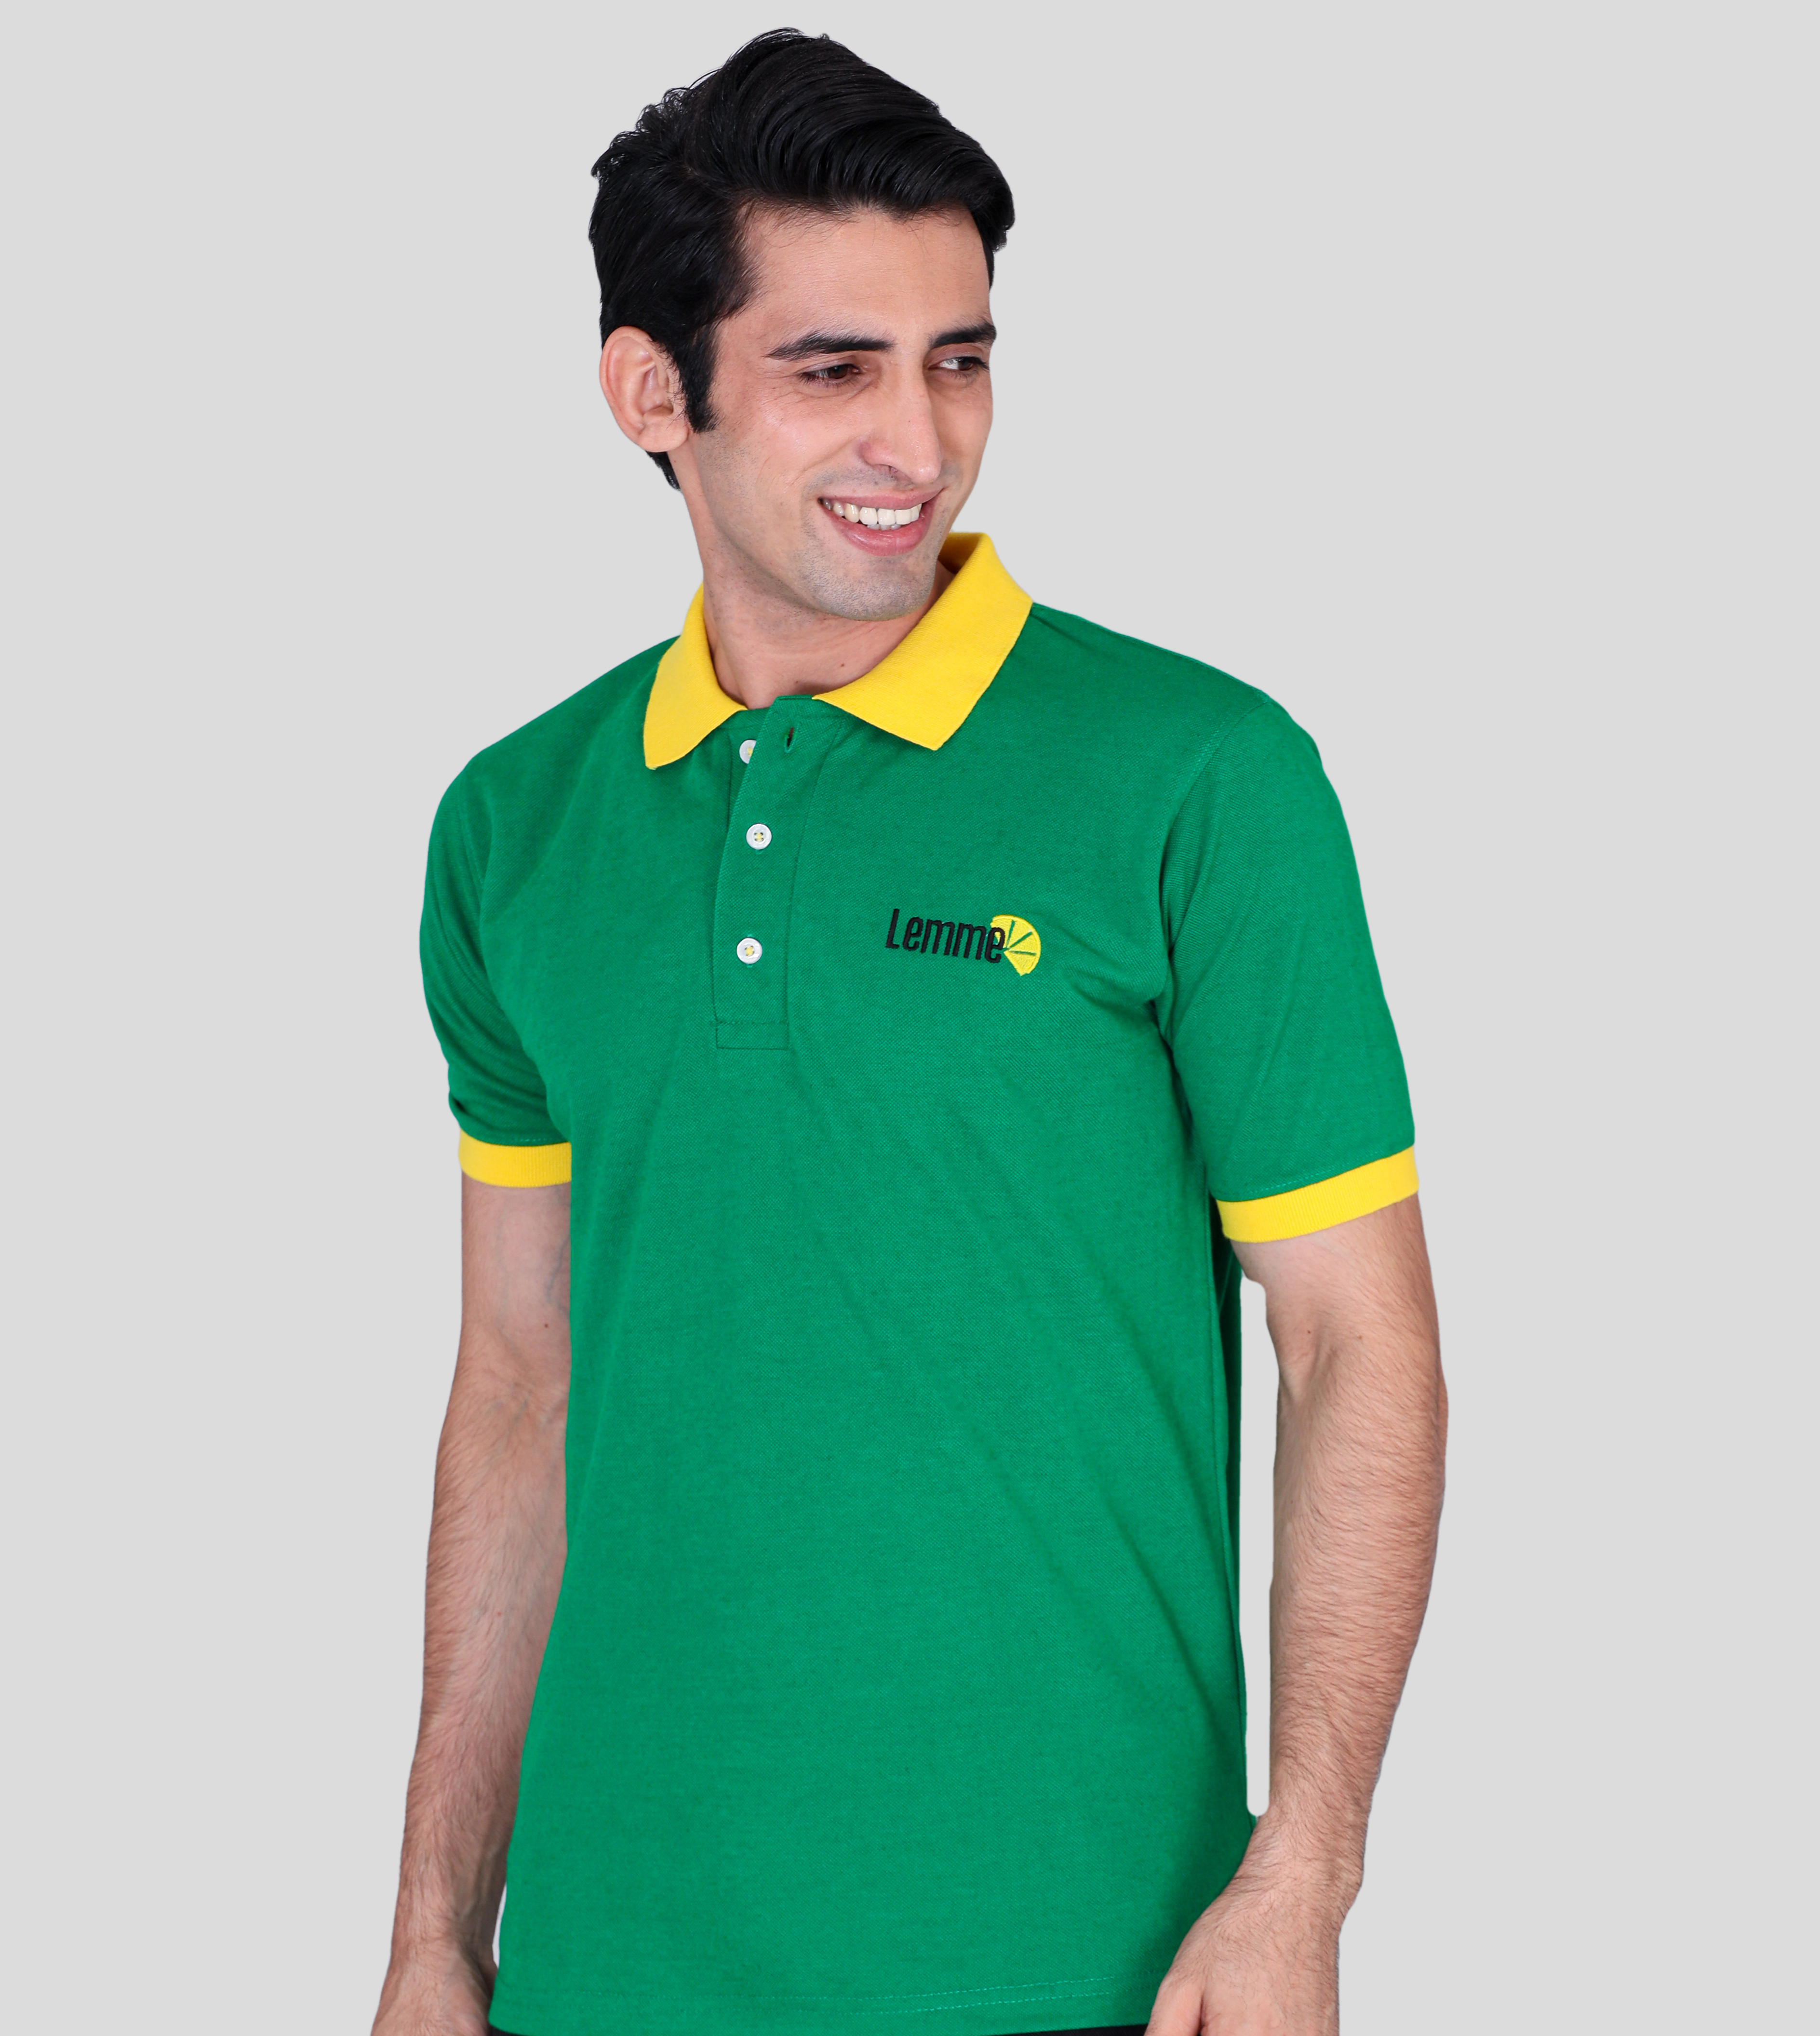 Lemme parrot green custom polo t-shirts with company logo